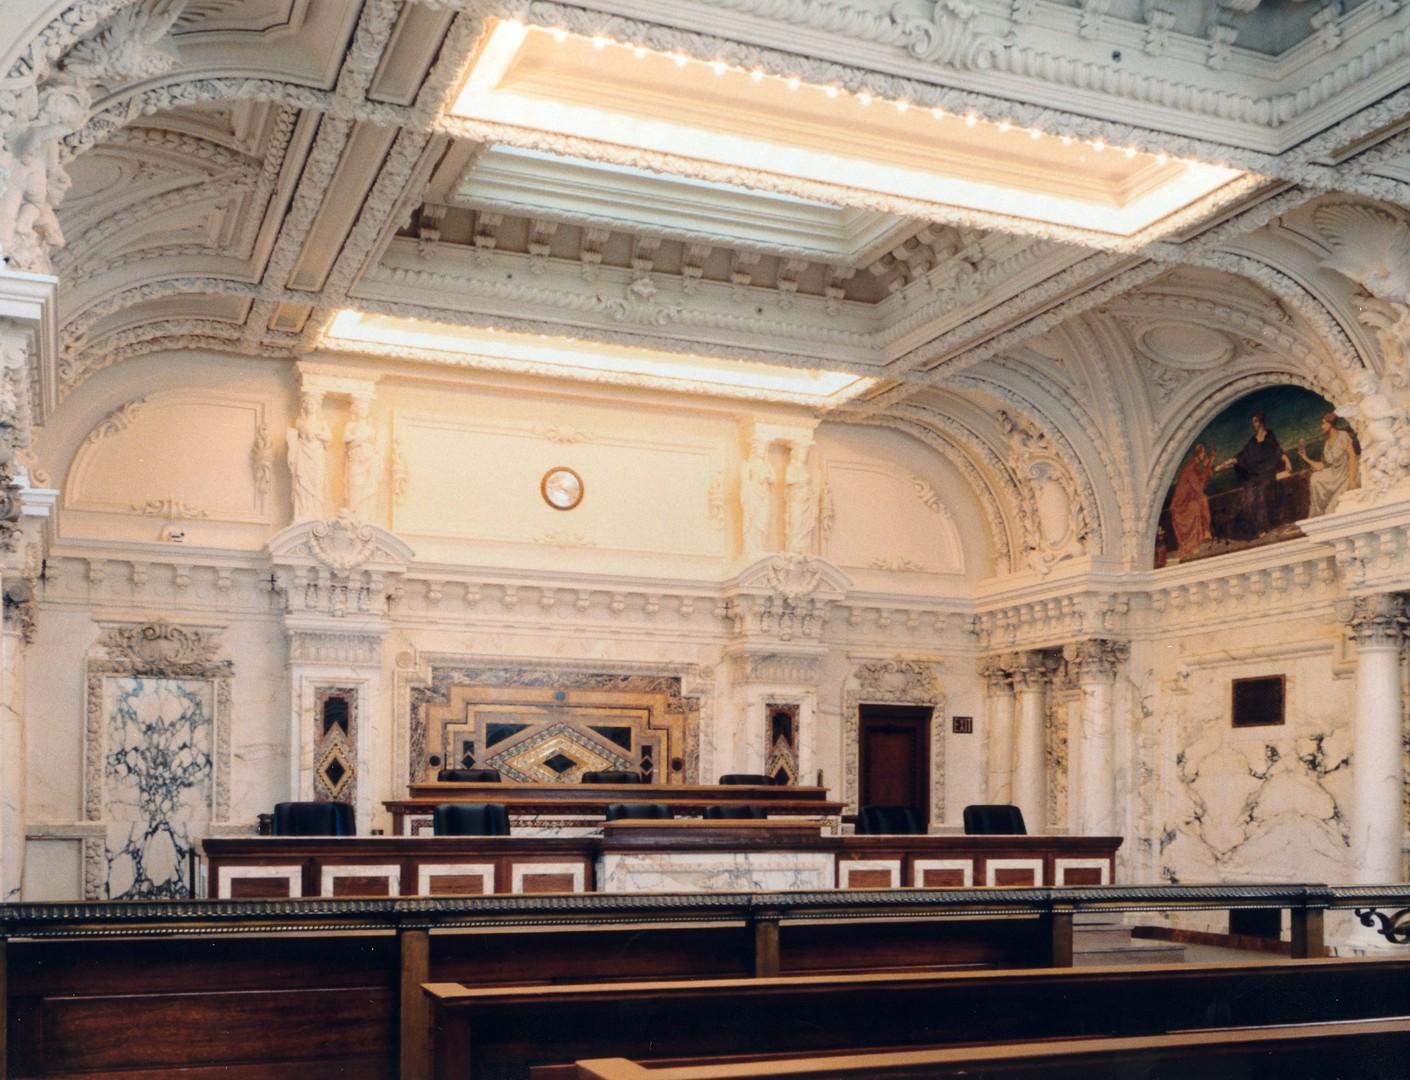 US Court of Appeals San Francisco interior courtroom